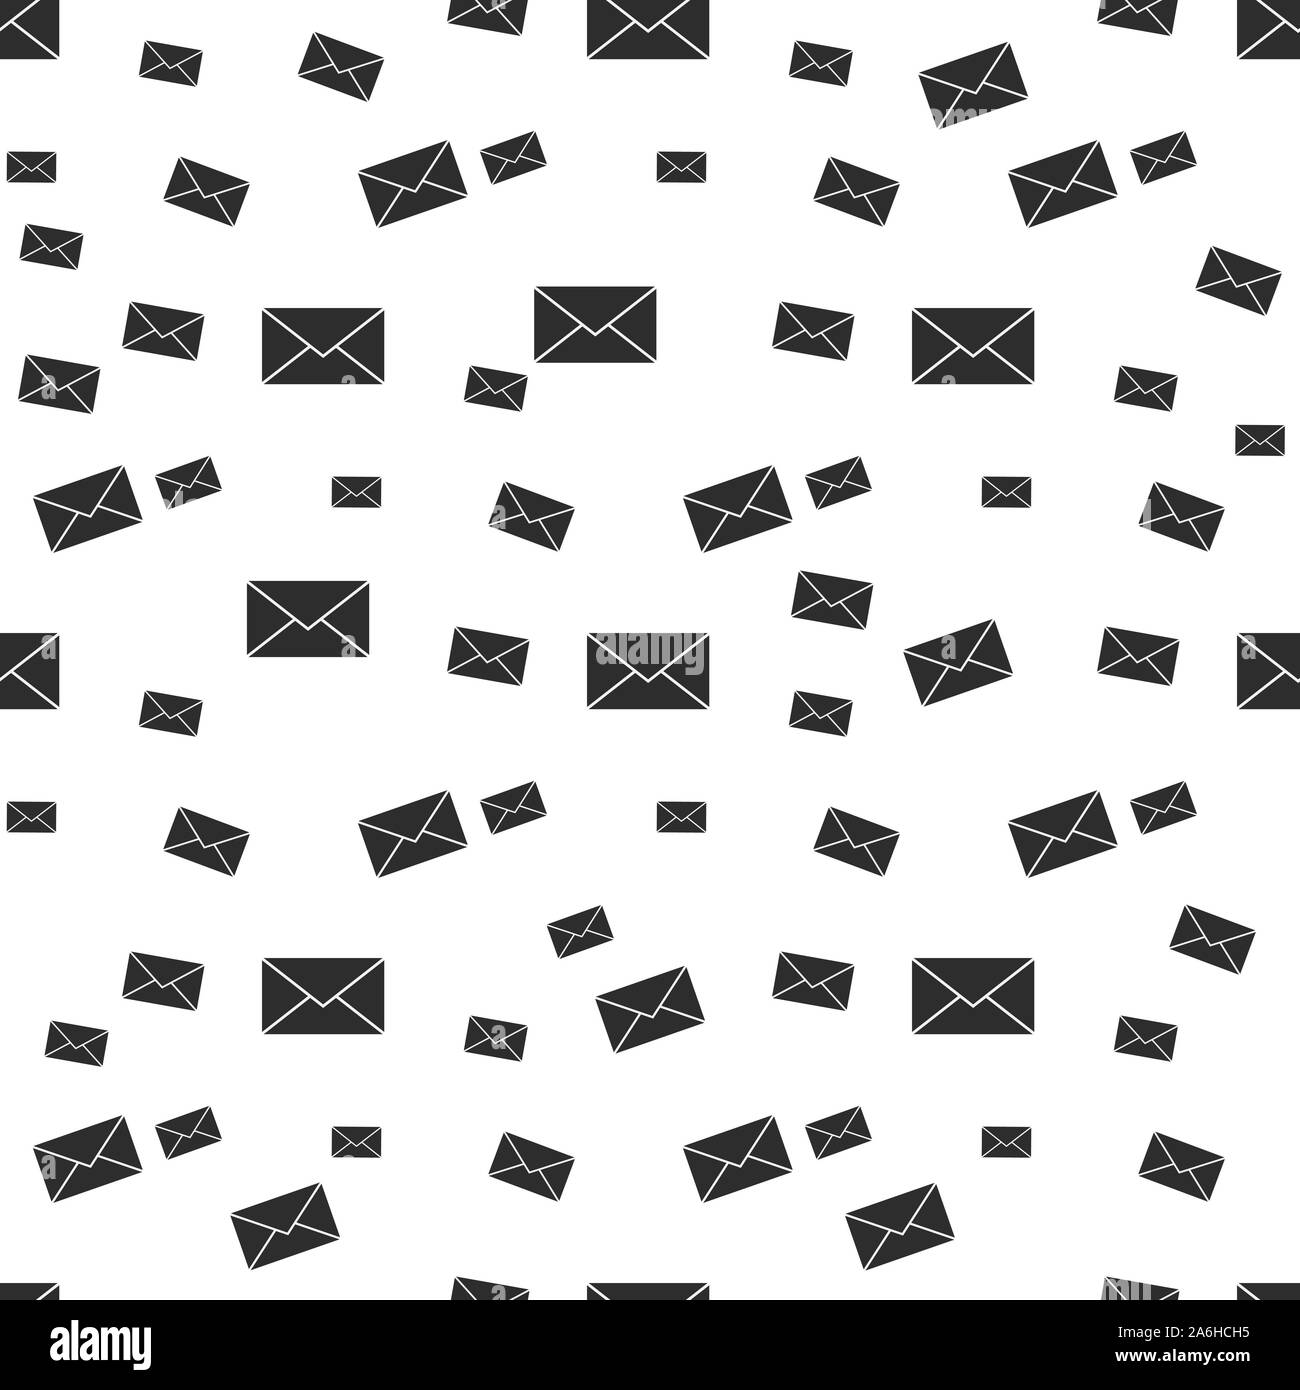 Mail envelope icon seamless pattern background. Email message vector illustration. Mailbox e-mail symbol pattern. Stock Vector